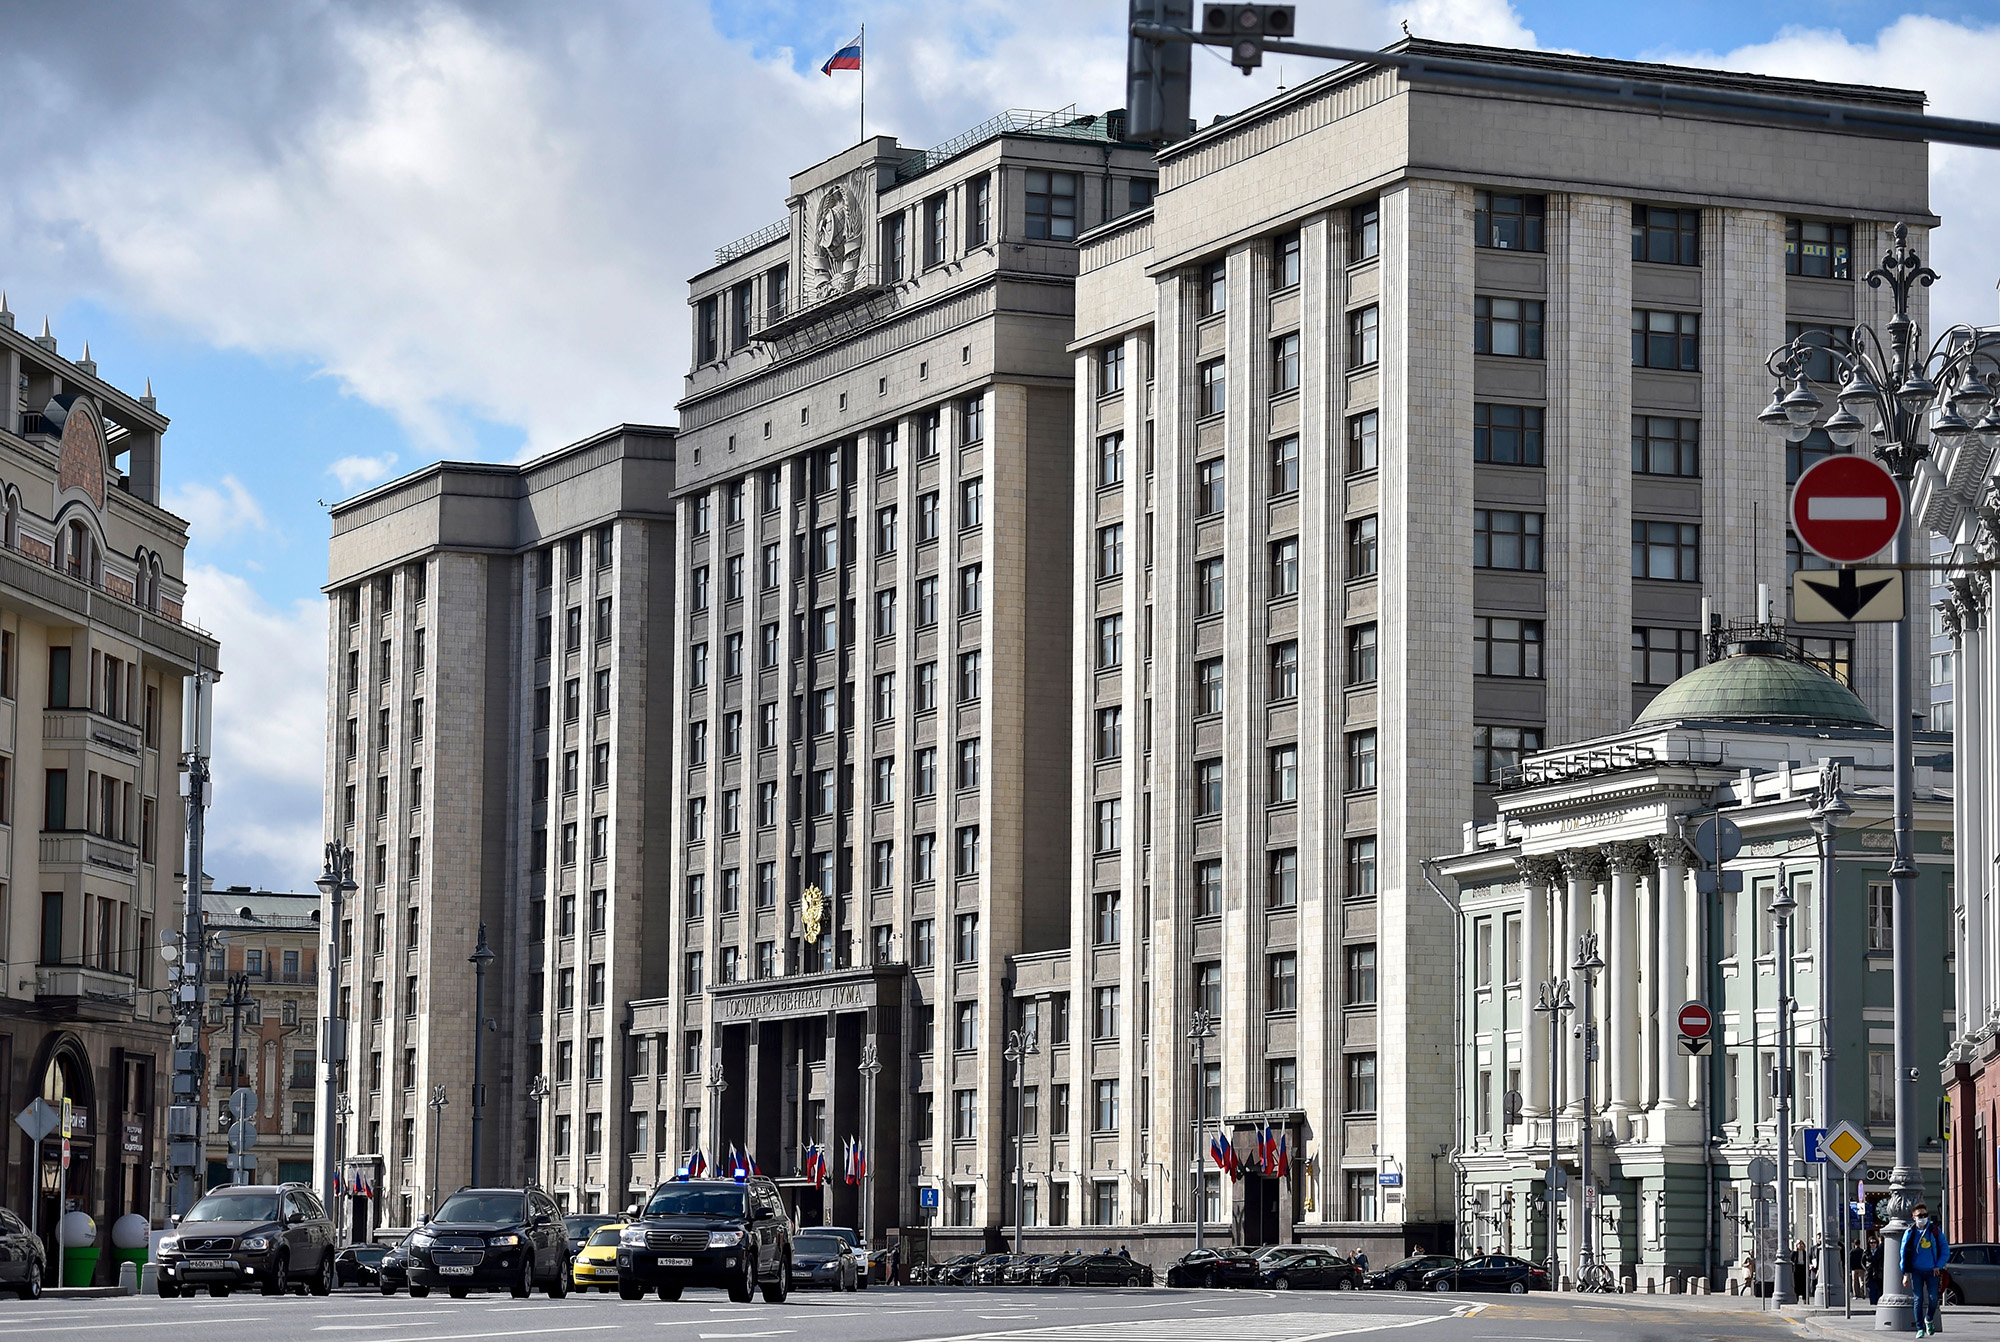 A general view of the building of the State Duma, the lower chamber of Russia's parliament, in Moscow on September 15, 2020.